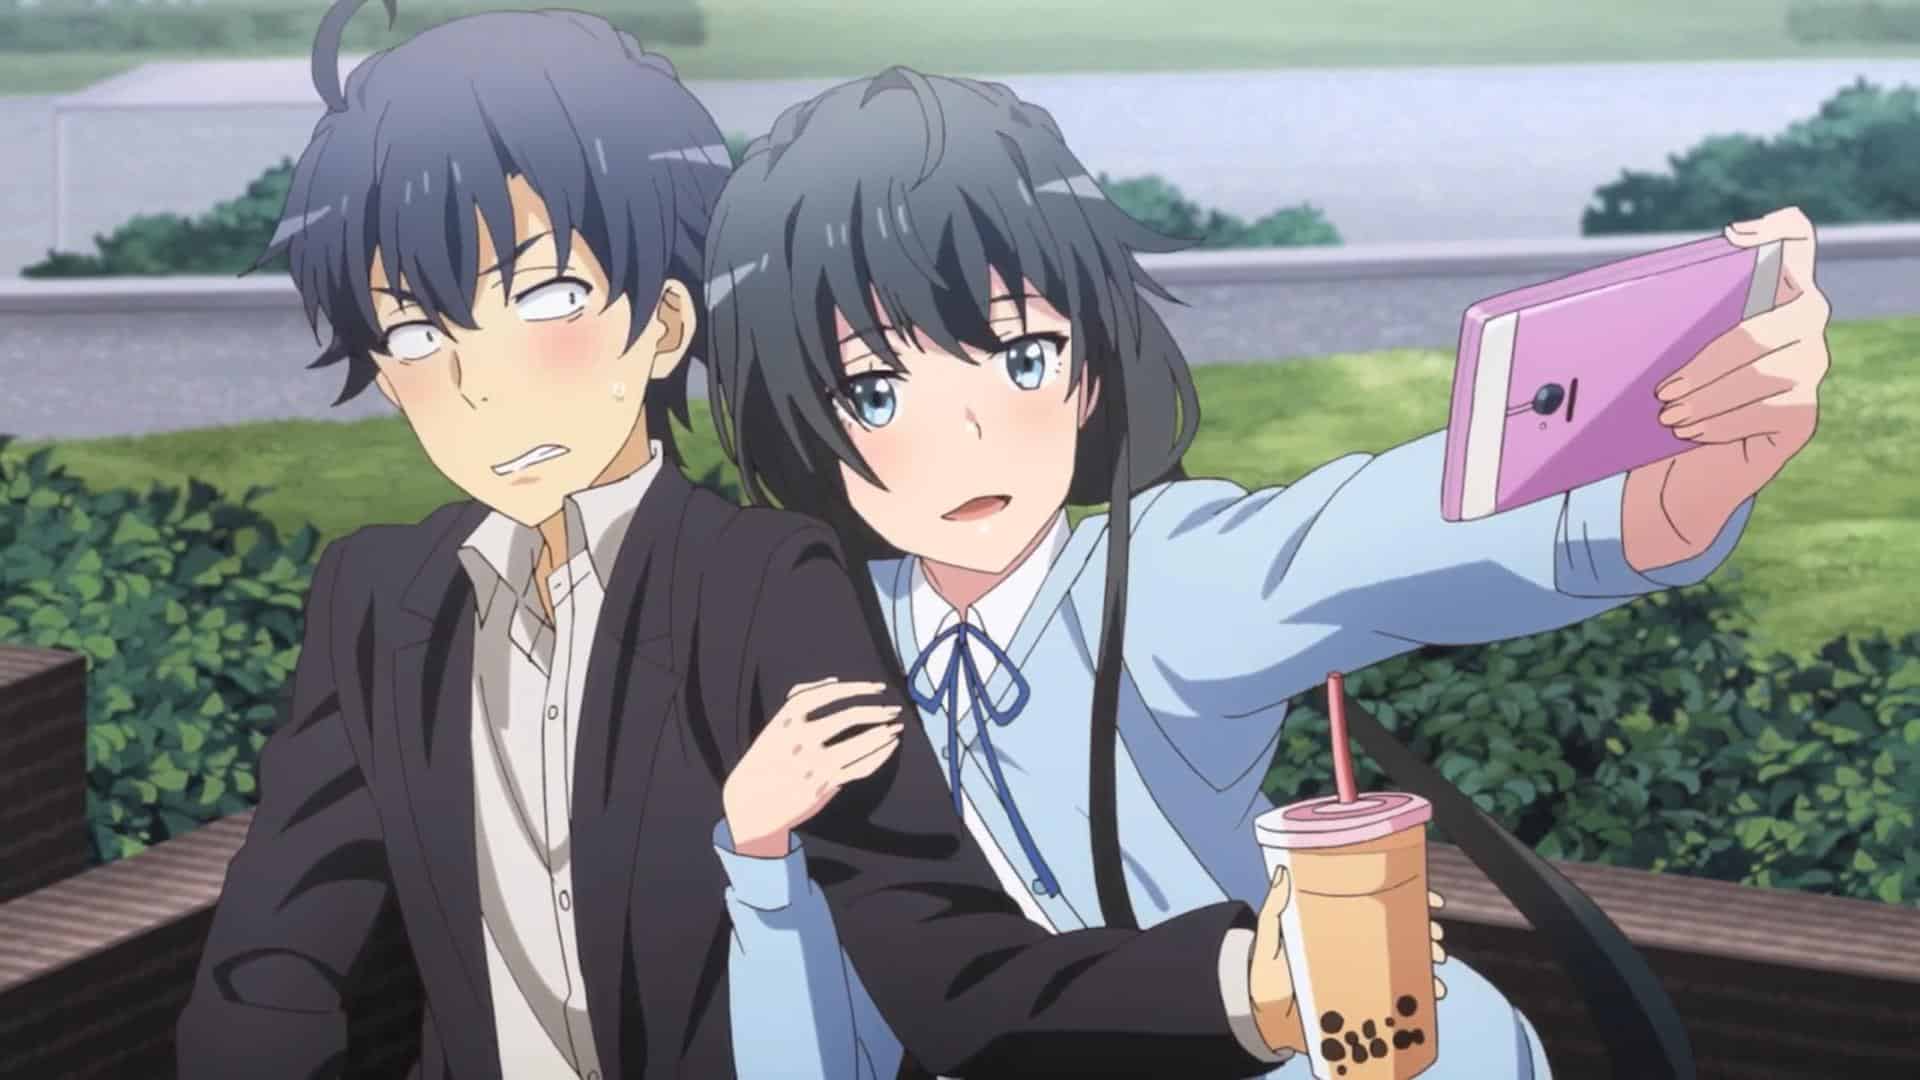 One Of The Best Anime Like A Couple Of Cuckoos: My Youth Romantic Comedy Is Wrong, as I Expected